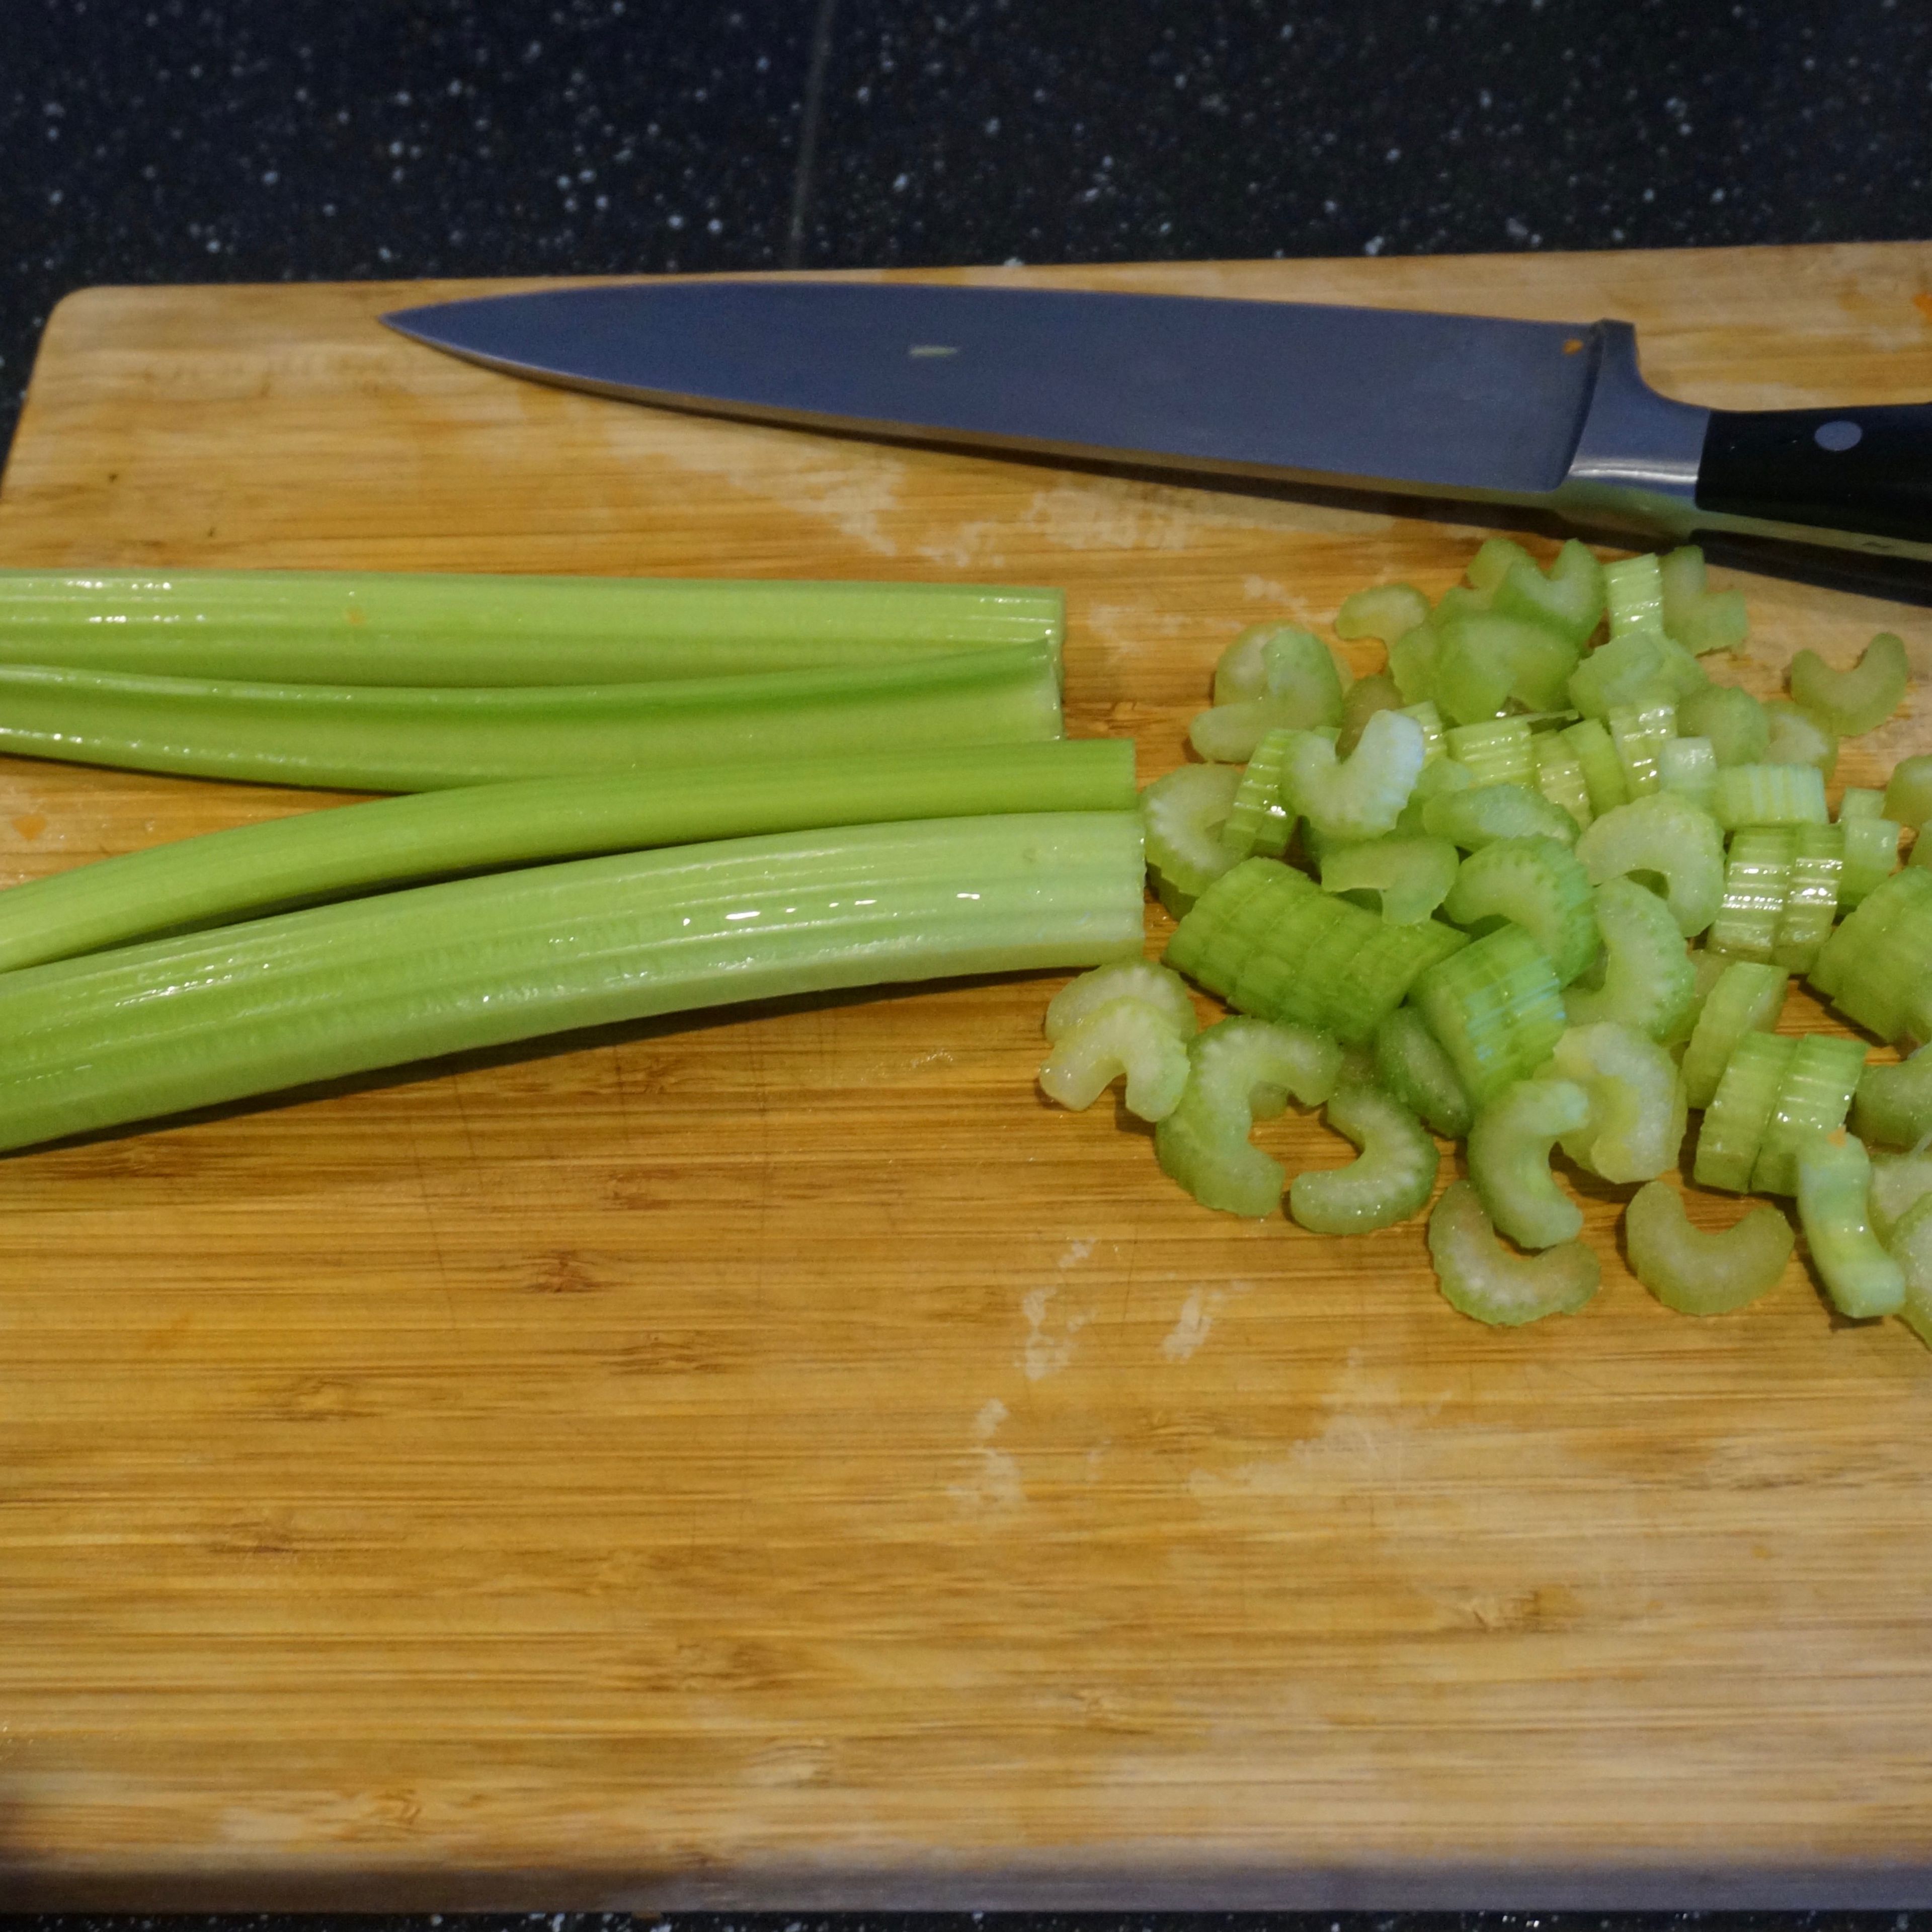 Cut into slices the celery, add to the saucepan with onion and carrots.